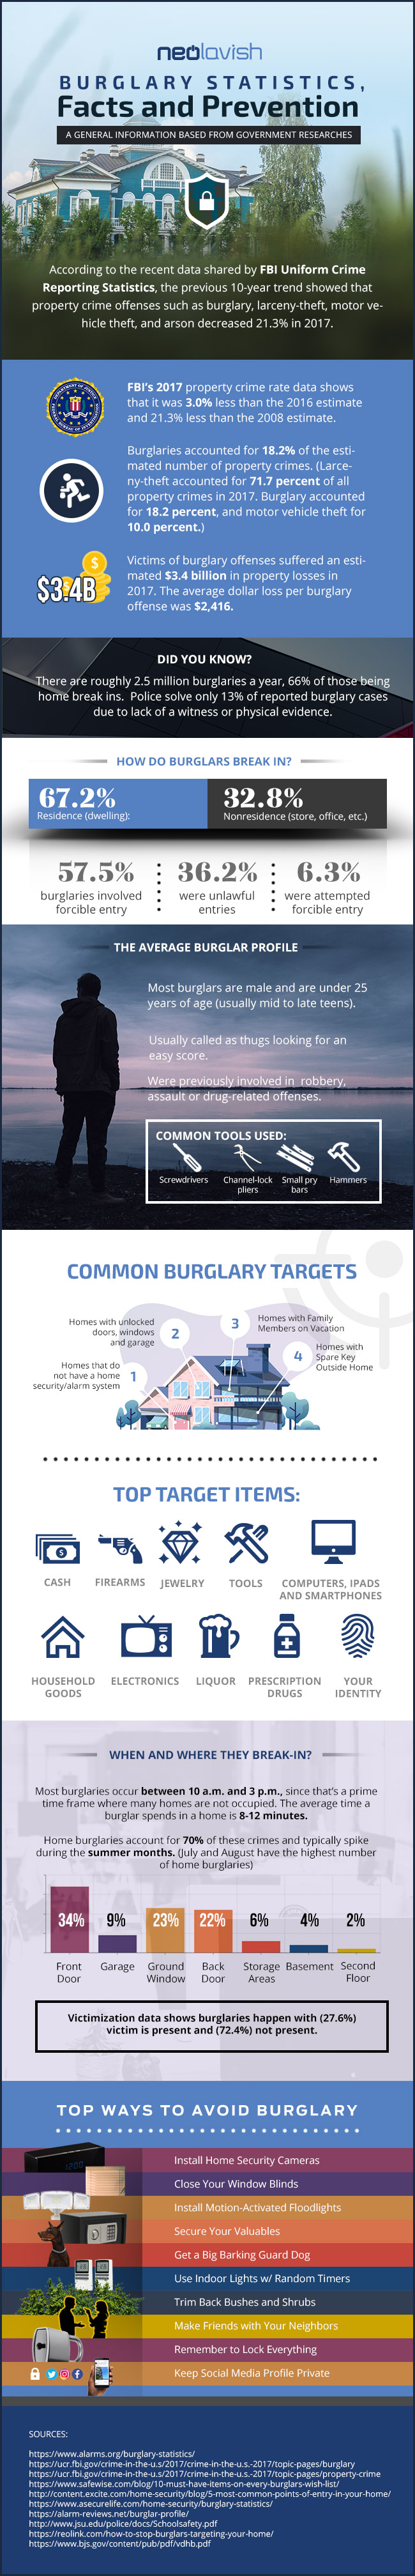 Burglary Statistics, Facts and Prevention